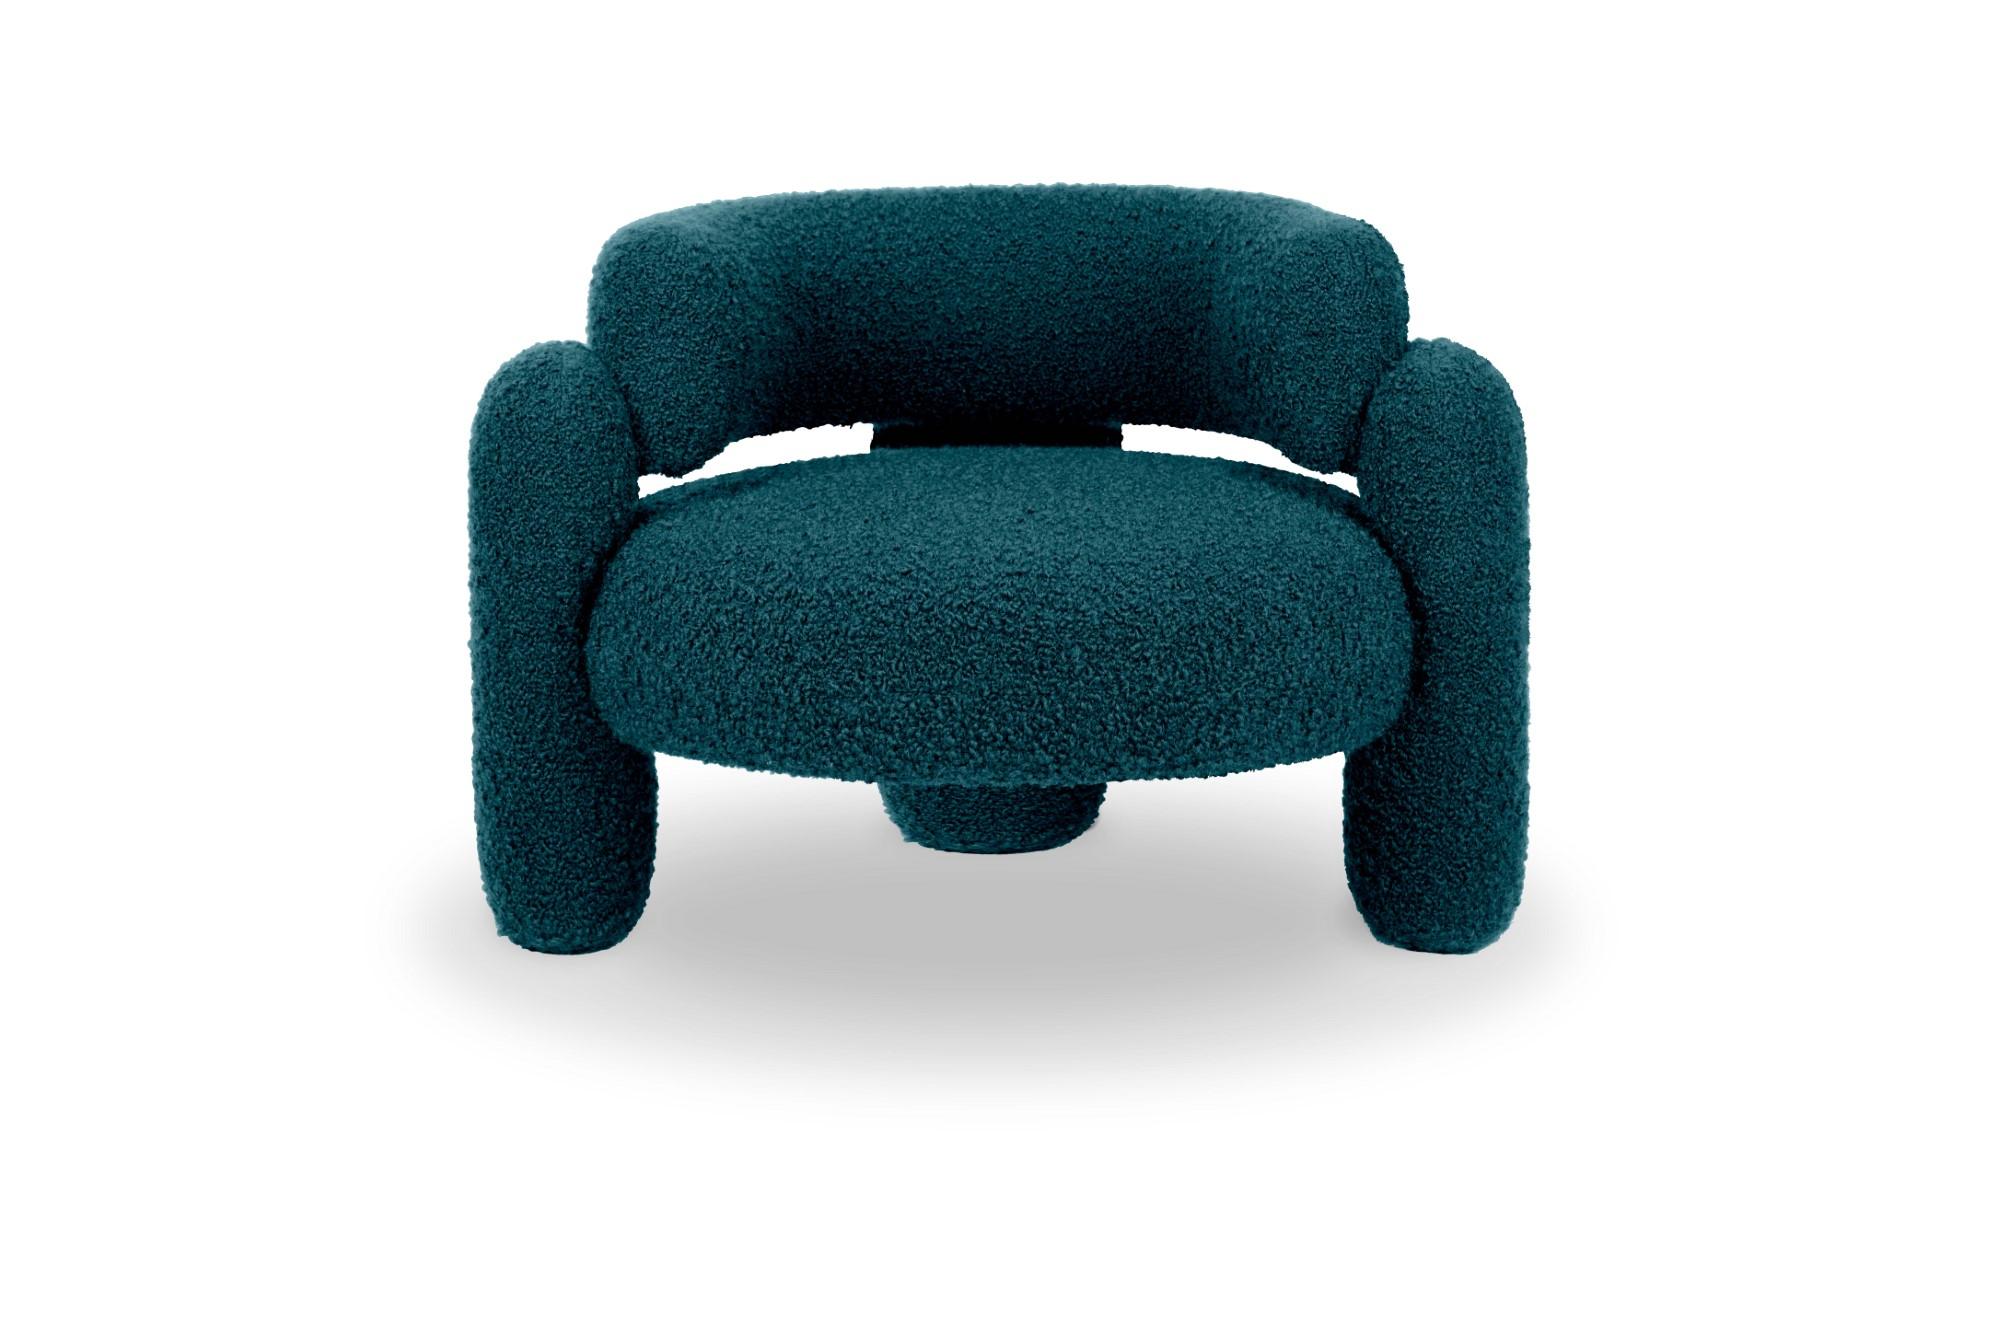 Embrace Cormo Azure Armchair by Royal Stranger
Dimensions: W 96 x D 85 x H 68 cm.
Different upholstery colors and finishes are available. Please contact us.
Materials: Upholstery.
Featuring an enfolding composition of geometrical shapes, the